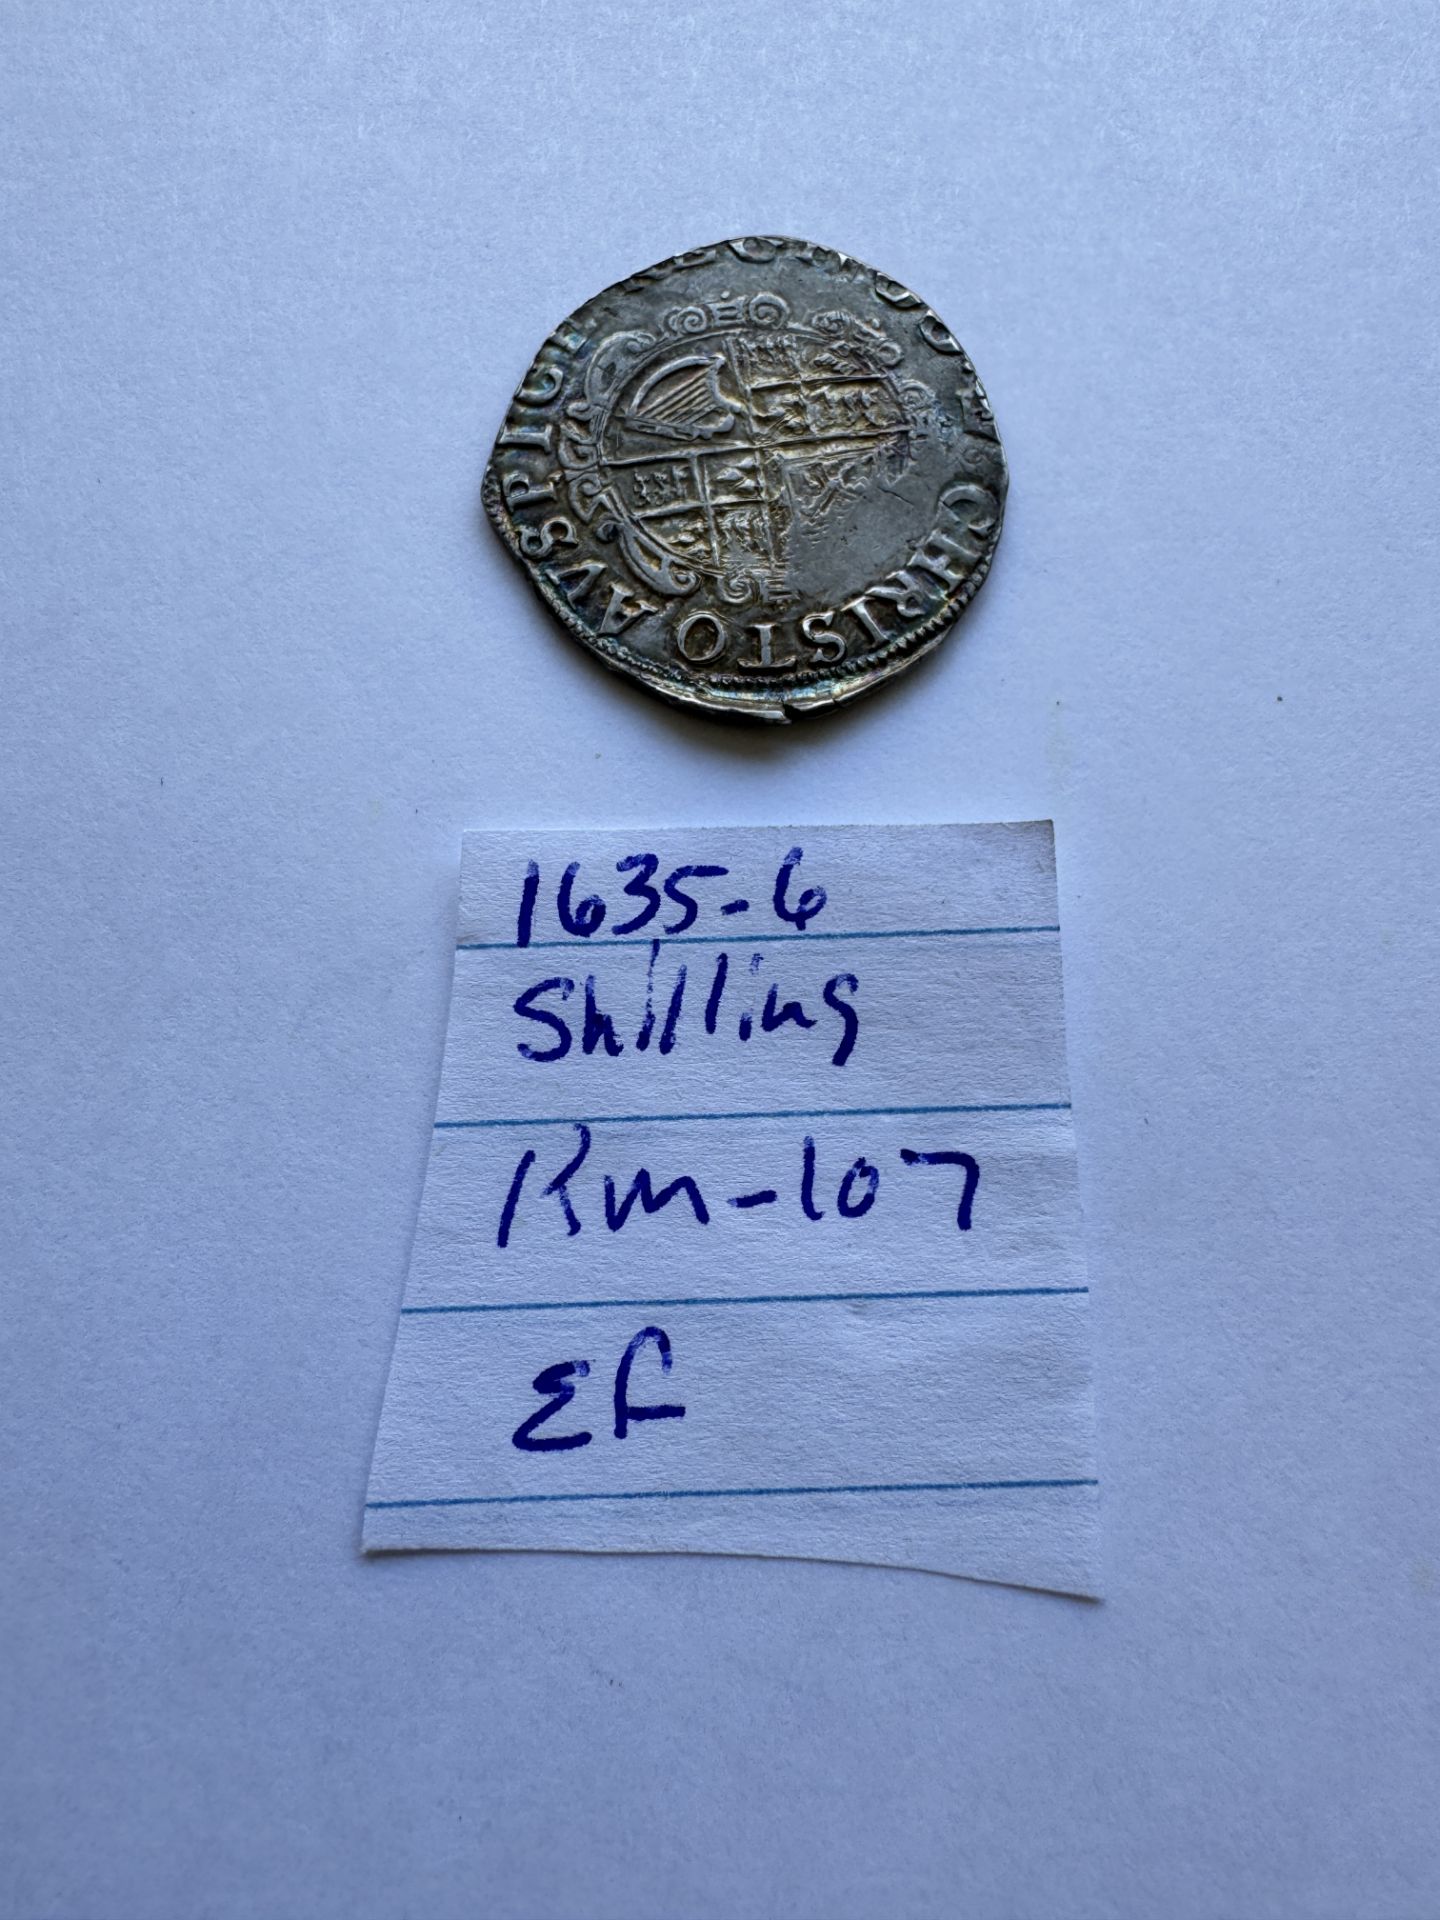 1635-1636 CHARLES I SHILLING COIN - Image 2 of 2